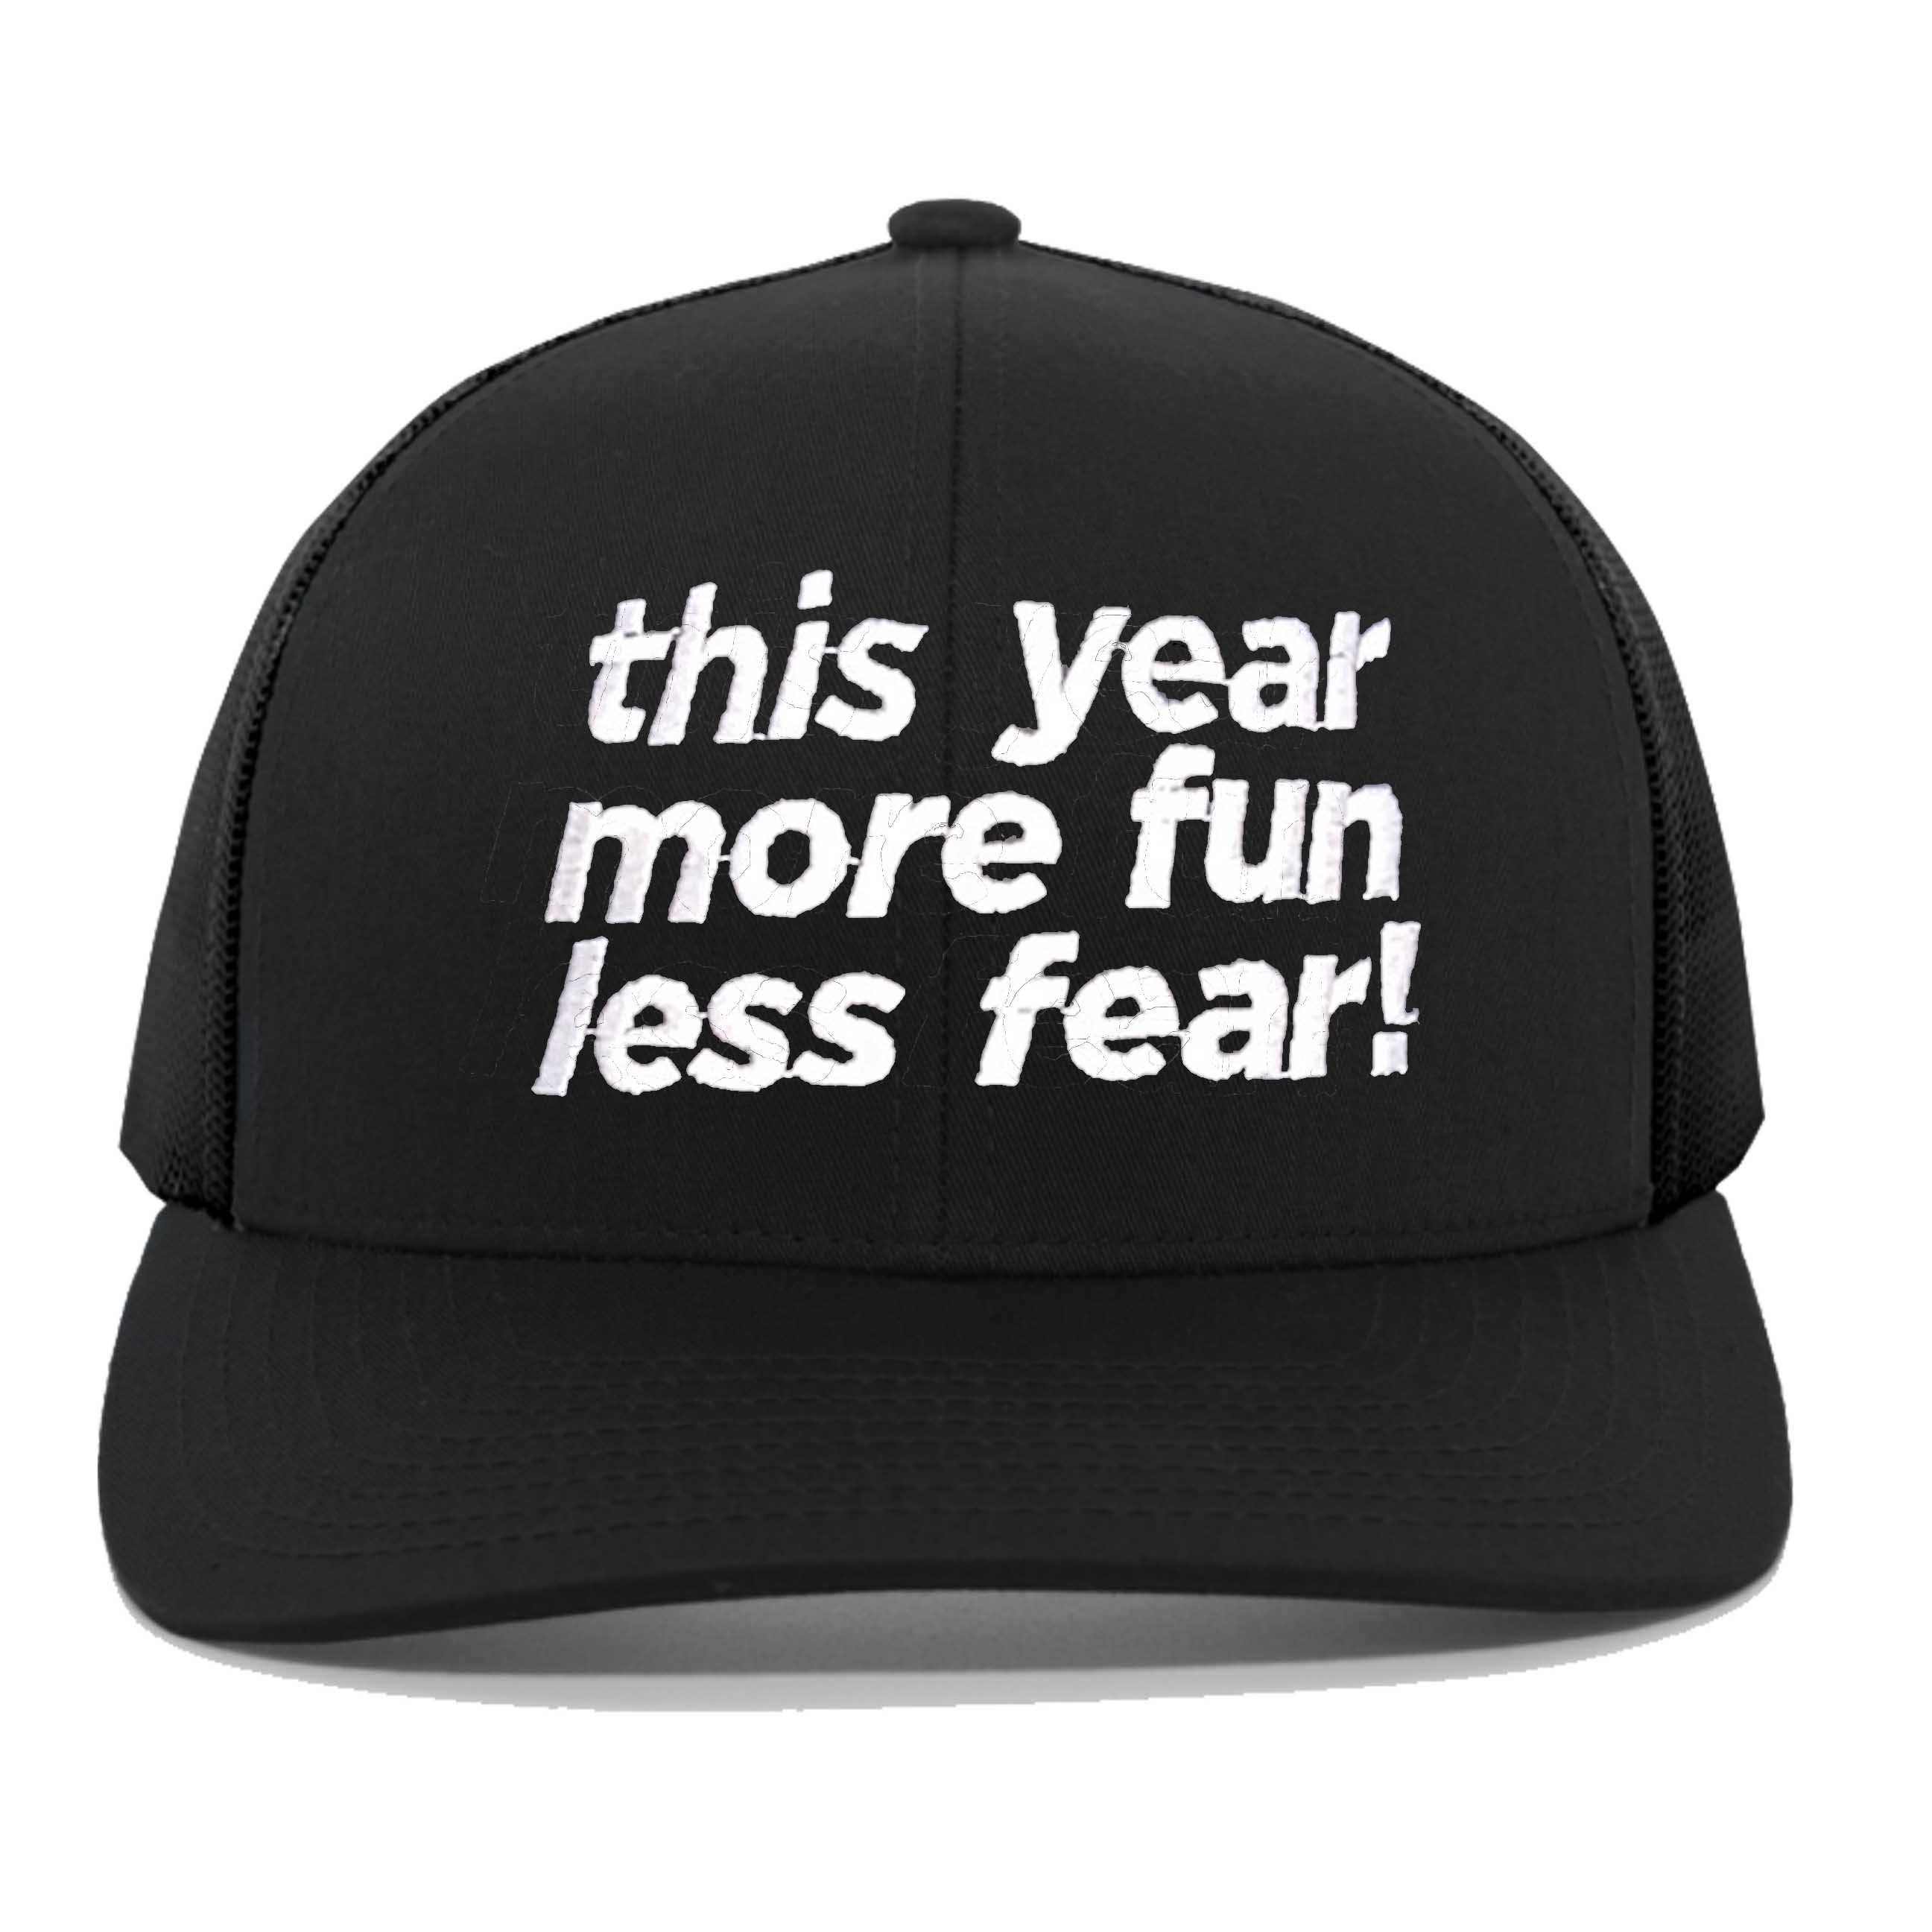 this year more fun less fear snapback hat black